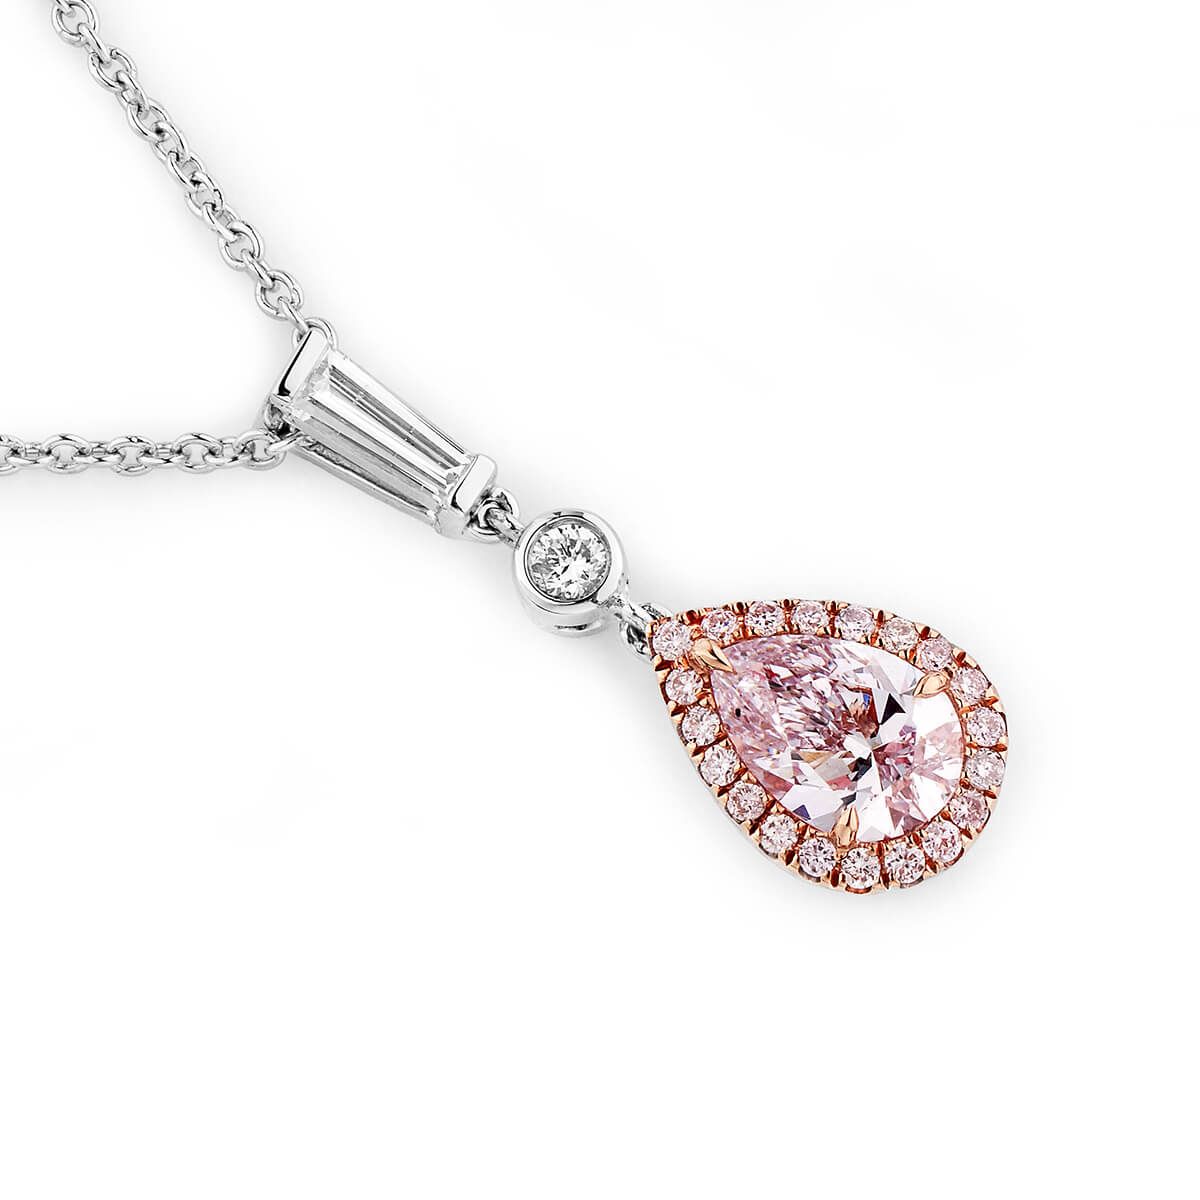 Very Light Pink Diamond Necklace, 0.70 Ct. TW, Pear shape, GIA Certified, 2195029005